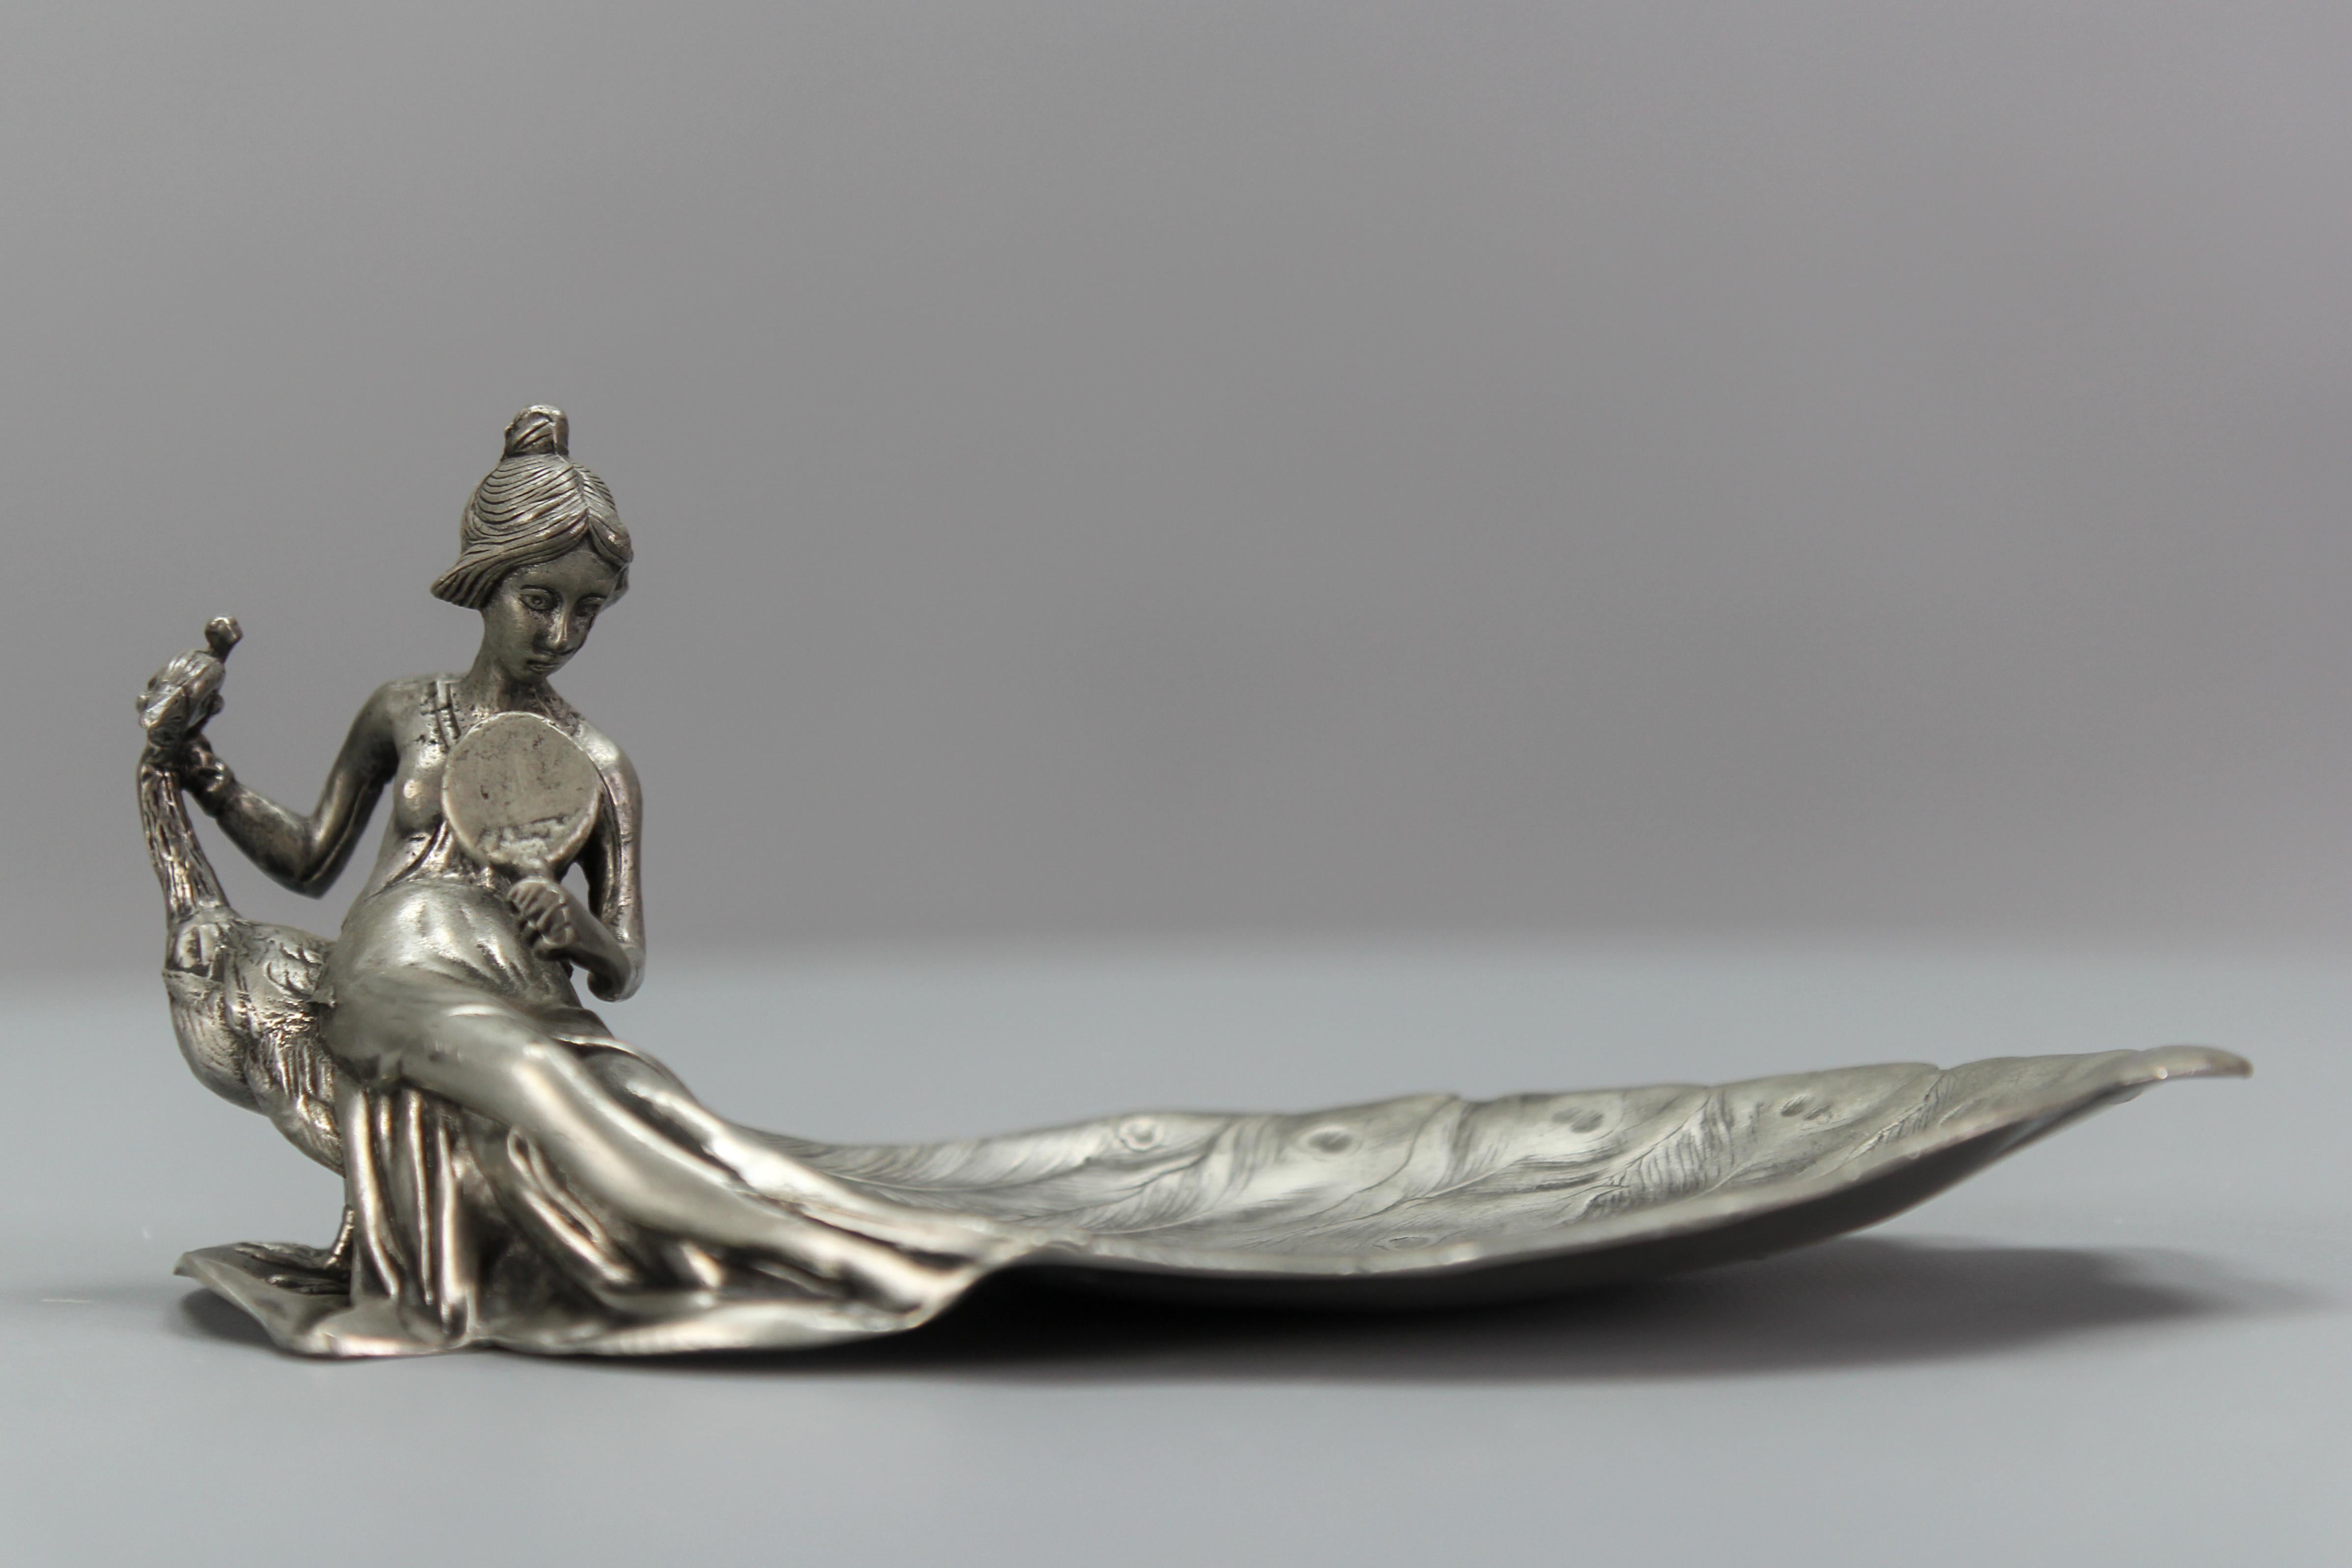 French Art Nouveau style pewter vide-poche or pin tray a lady with a peacock from circa 1950s.
This adorable card tray or pin tray, Vide-Poche, is made of pewter and features a young lady looking in the mirror, one arm wrapped around a peacock,